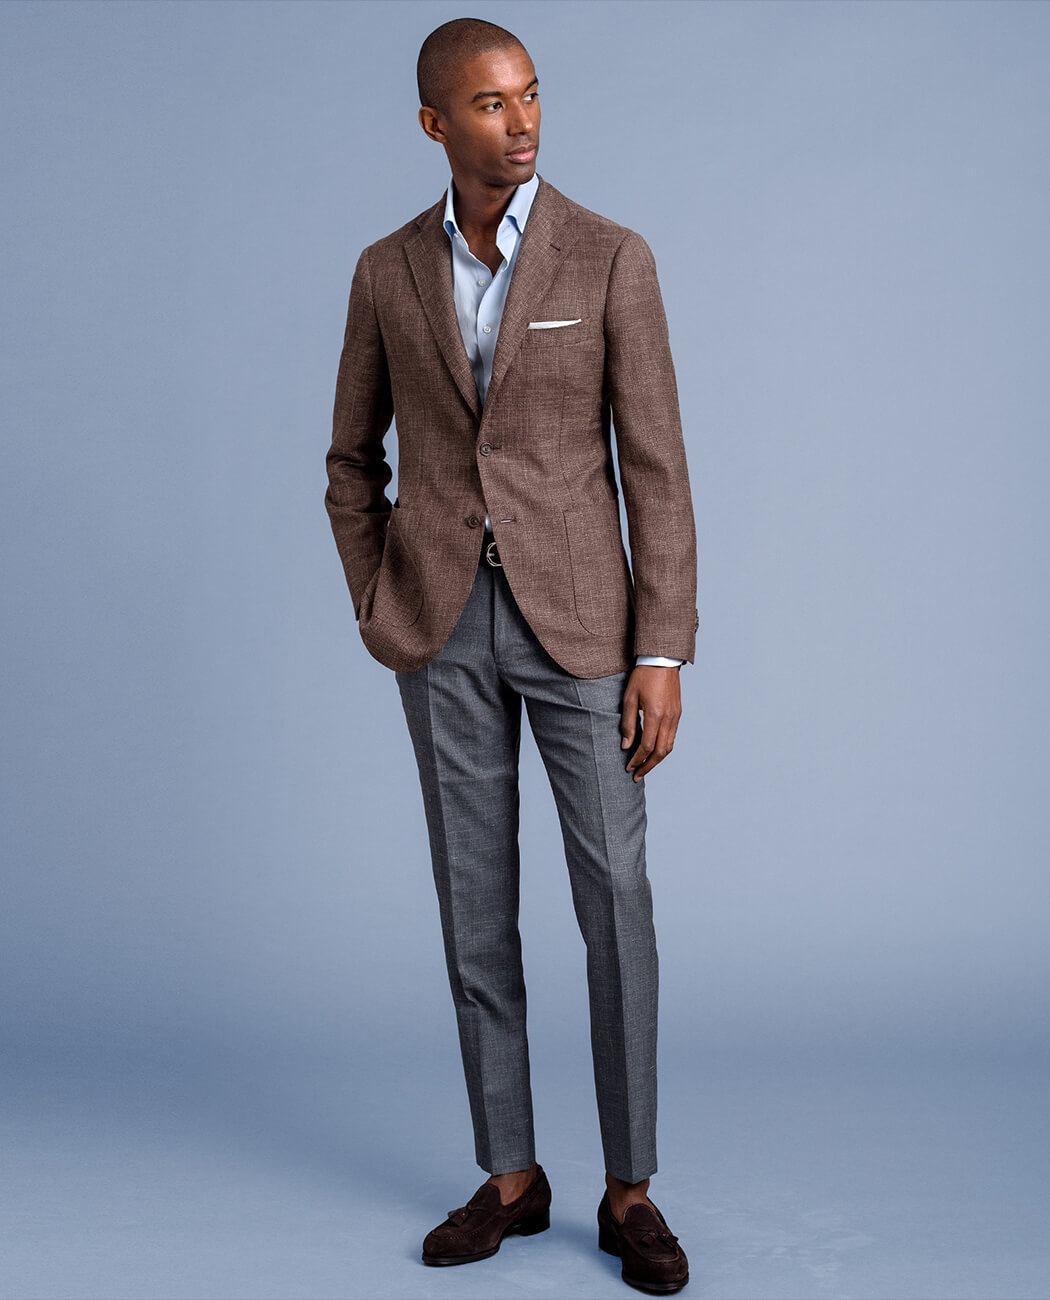 Tailored Clothing | Custom Suits, Jackets and Trousers - Proper Cloth